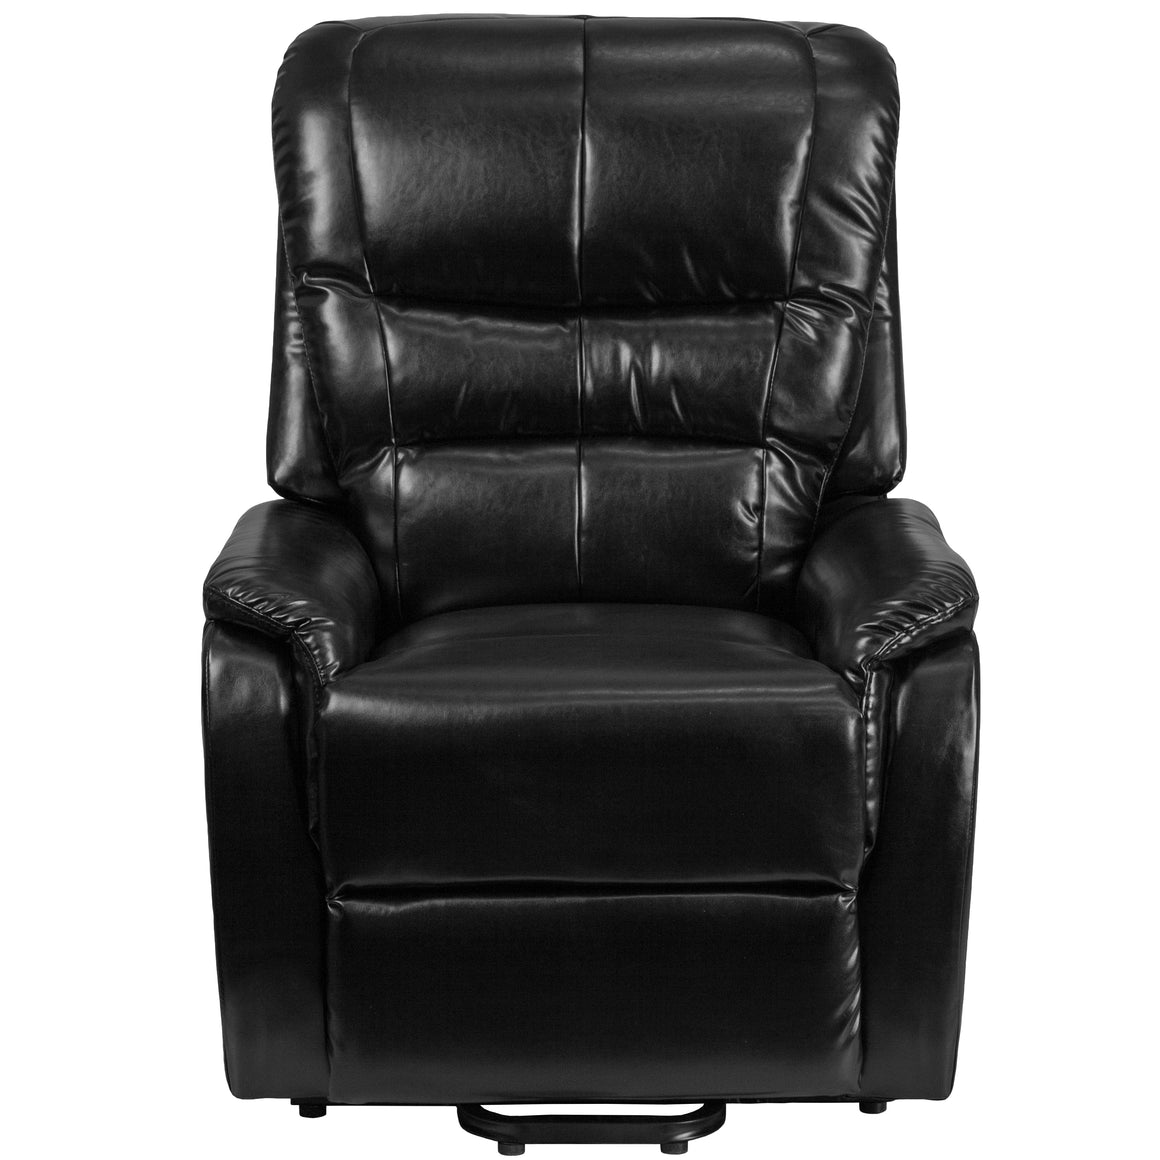 Power Lift Assist Recliner Chair Contemporary Style - Black - Man Cave Boutique